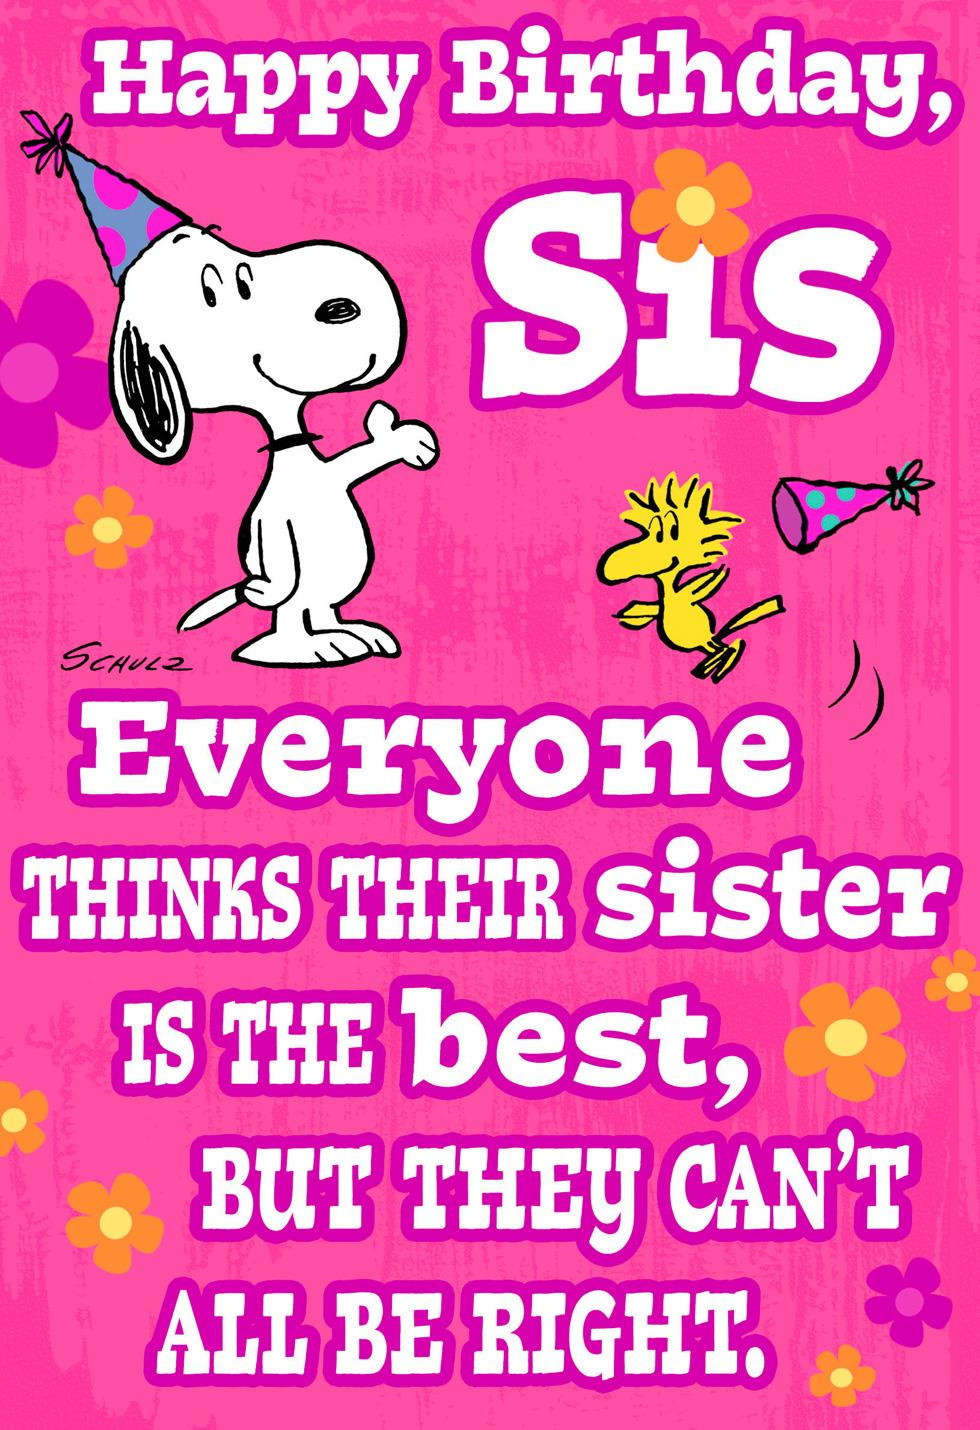 Funny Birthday Cards For Sisters
 Peanuts Snoopy and Woodstock Best Sister Funny Birthday